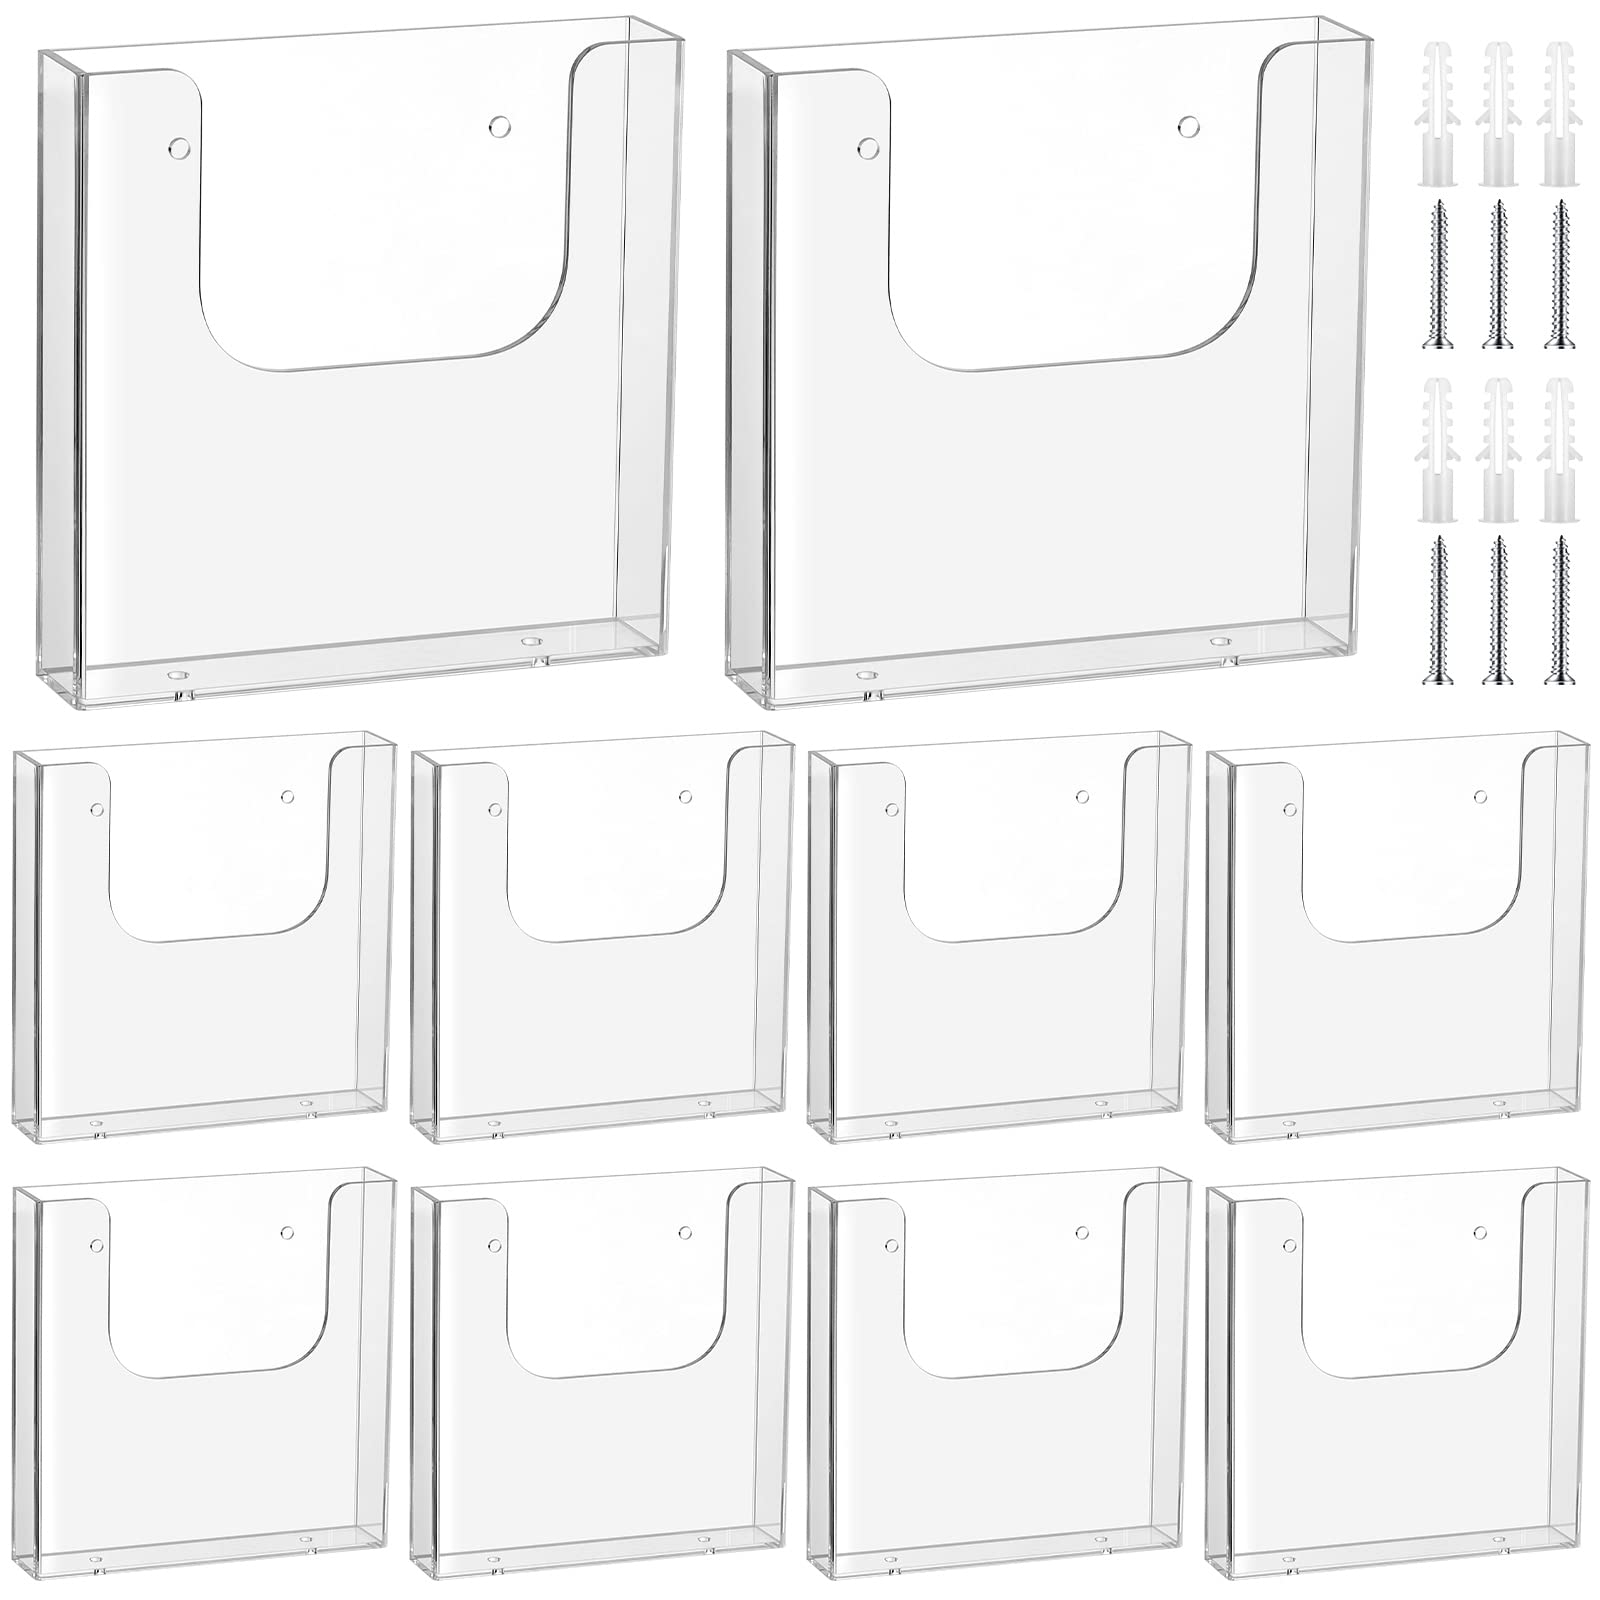 10 Pcs Brochure Holder 6.4 x 6.5 Inches Acrylic Flyer Holder Wall Mounted Magazine Holder Clear Document Holder Plastic Hanging Mail Holder for Wall Hanging Brochure Display for Office Class Supplies